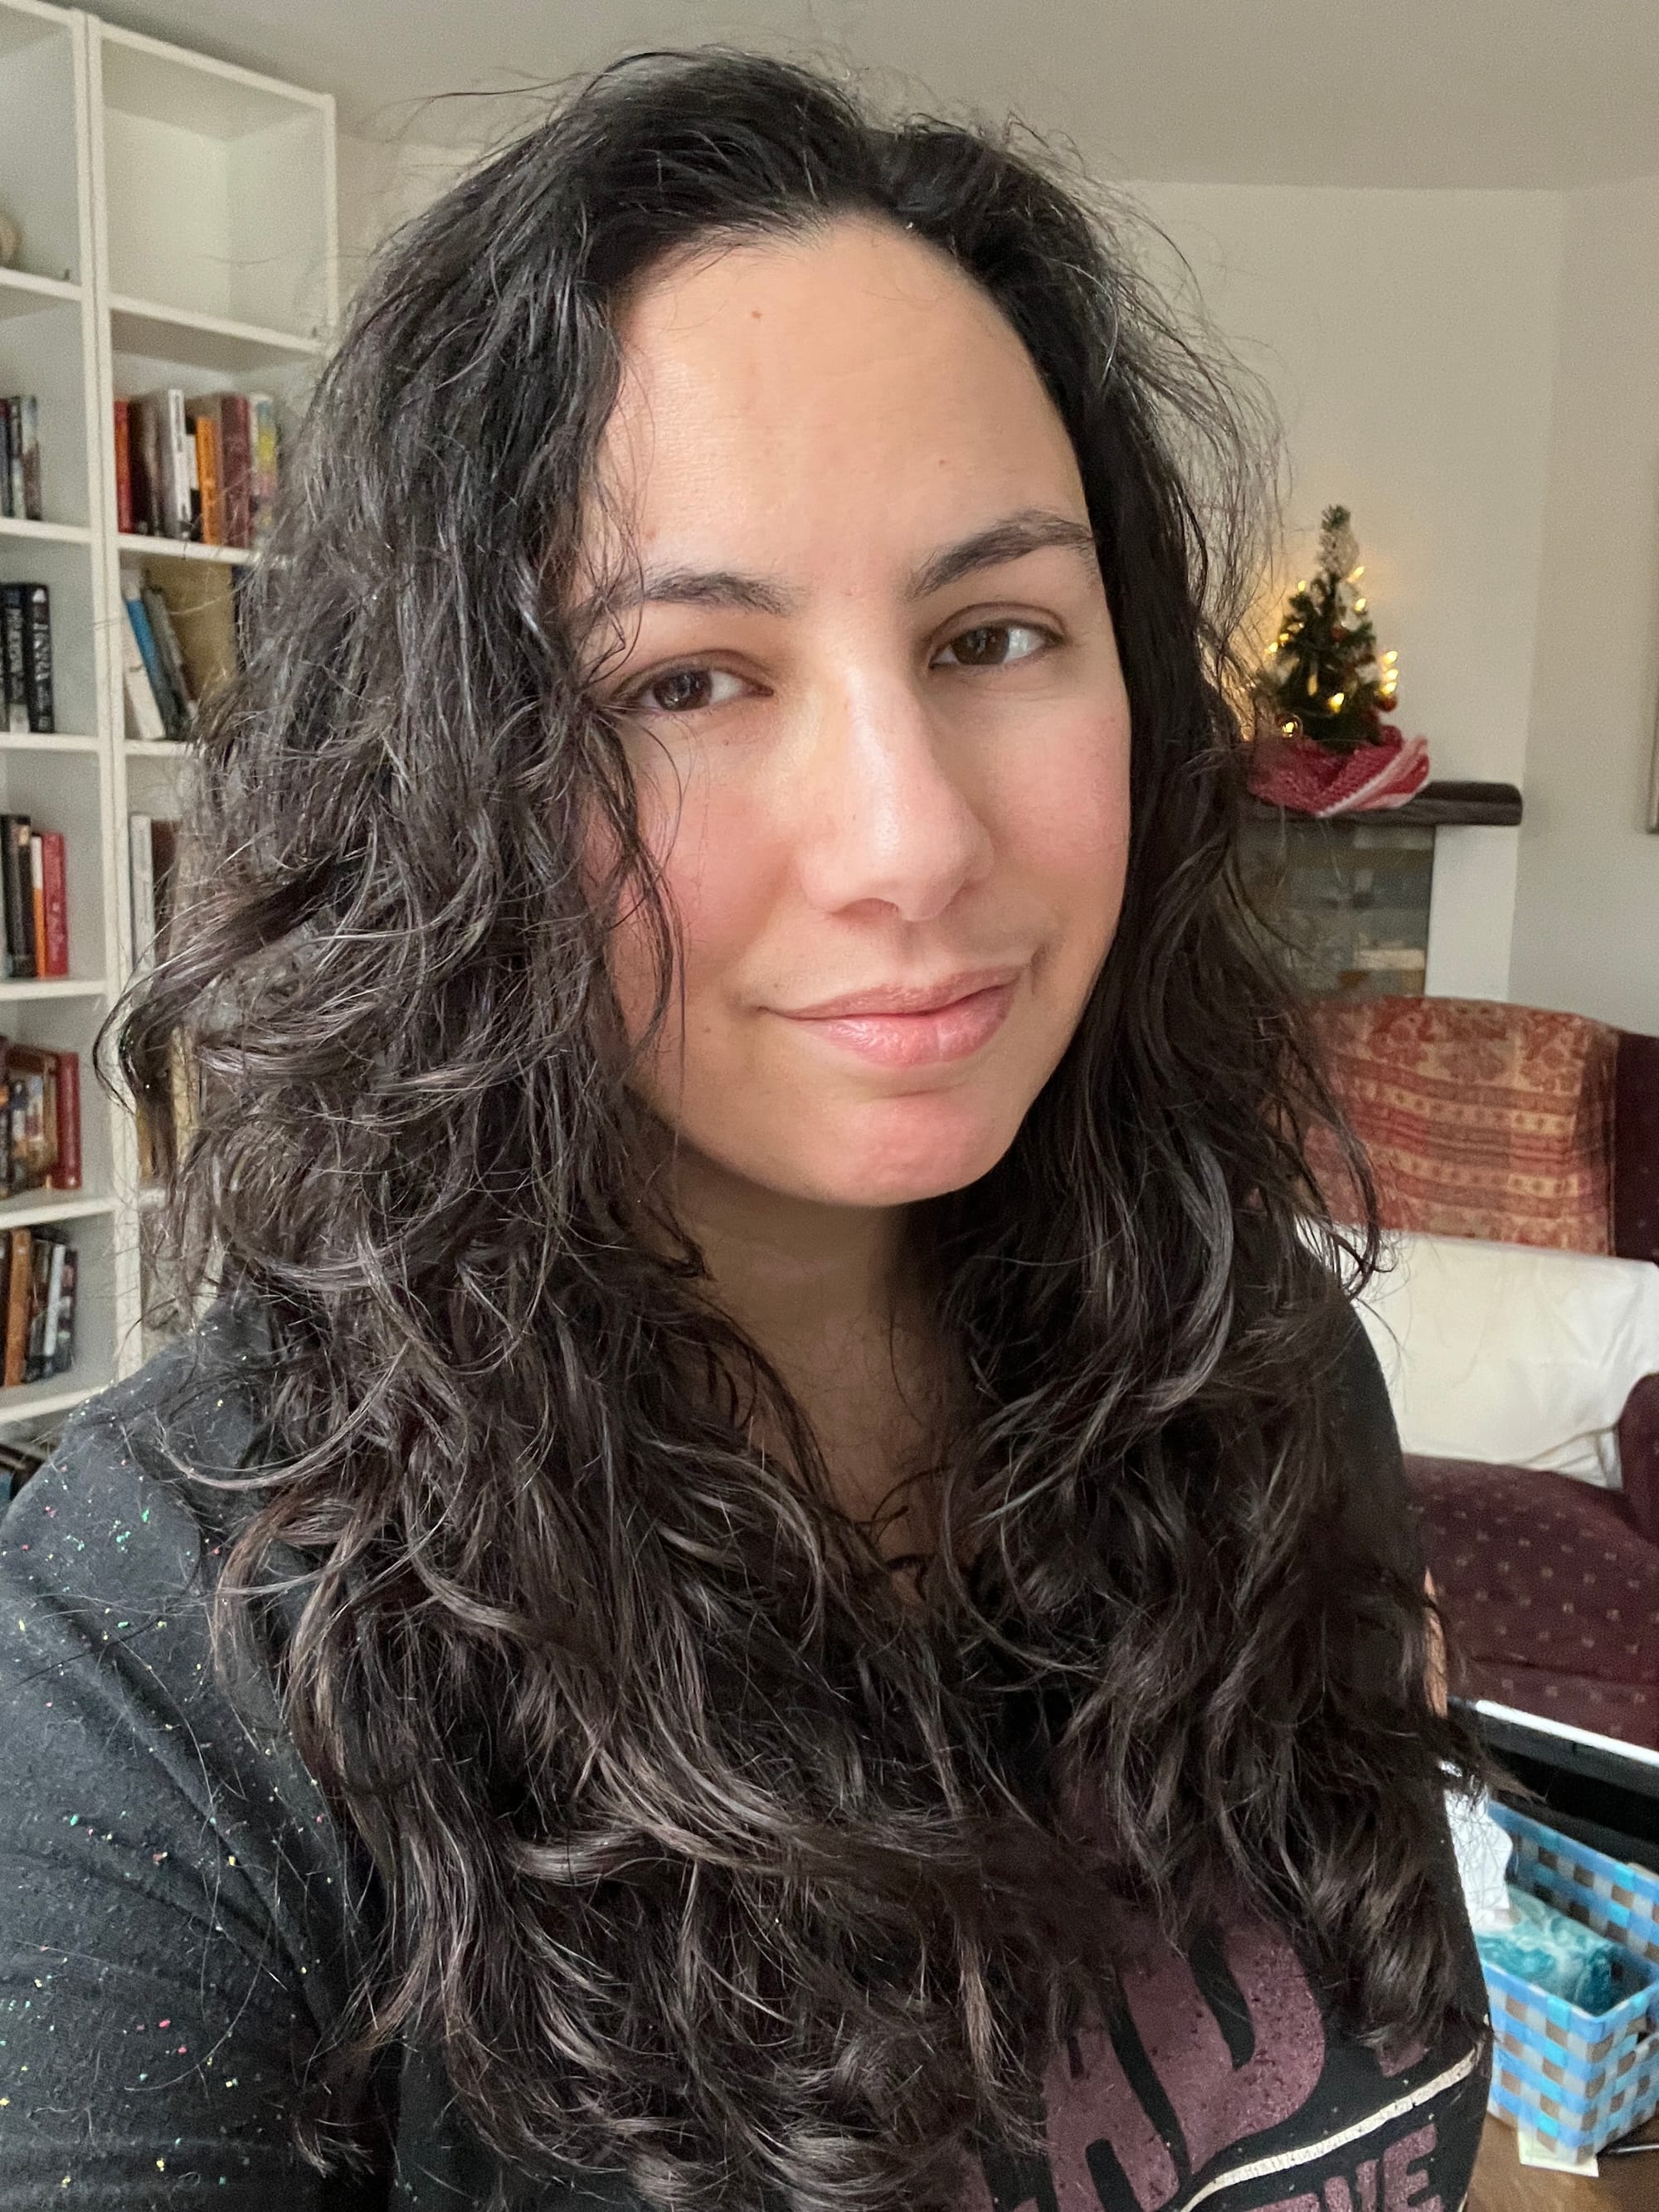 Selfie in which I'm smiling tiredly while my long dark hair is rocking some frankly spectacular waves over a Hadestown "Our Lady of the Underground" t-shirt. In the background are bookshelves and a very tiny Christmas tree on a mantle above the fireplace, wrapped in a red and white keffiyeh.